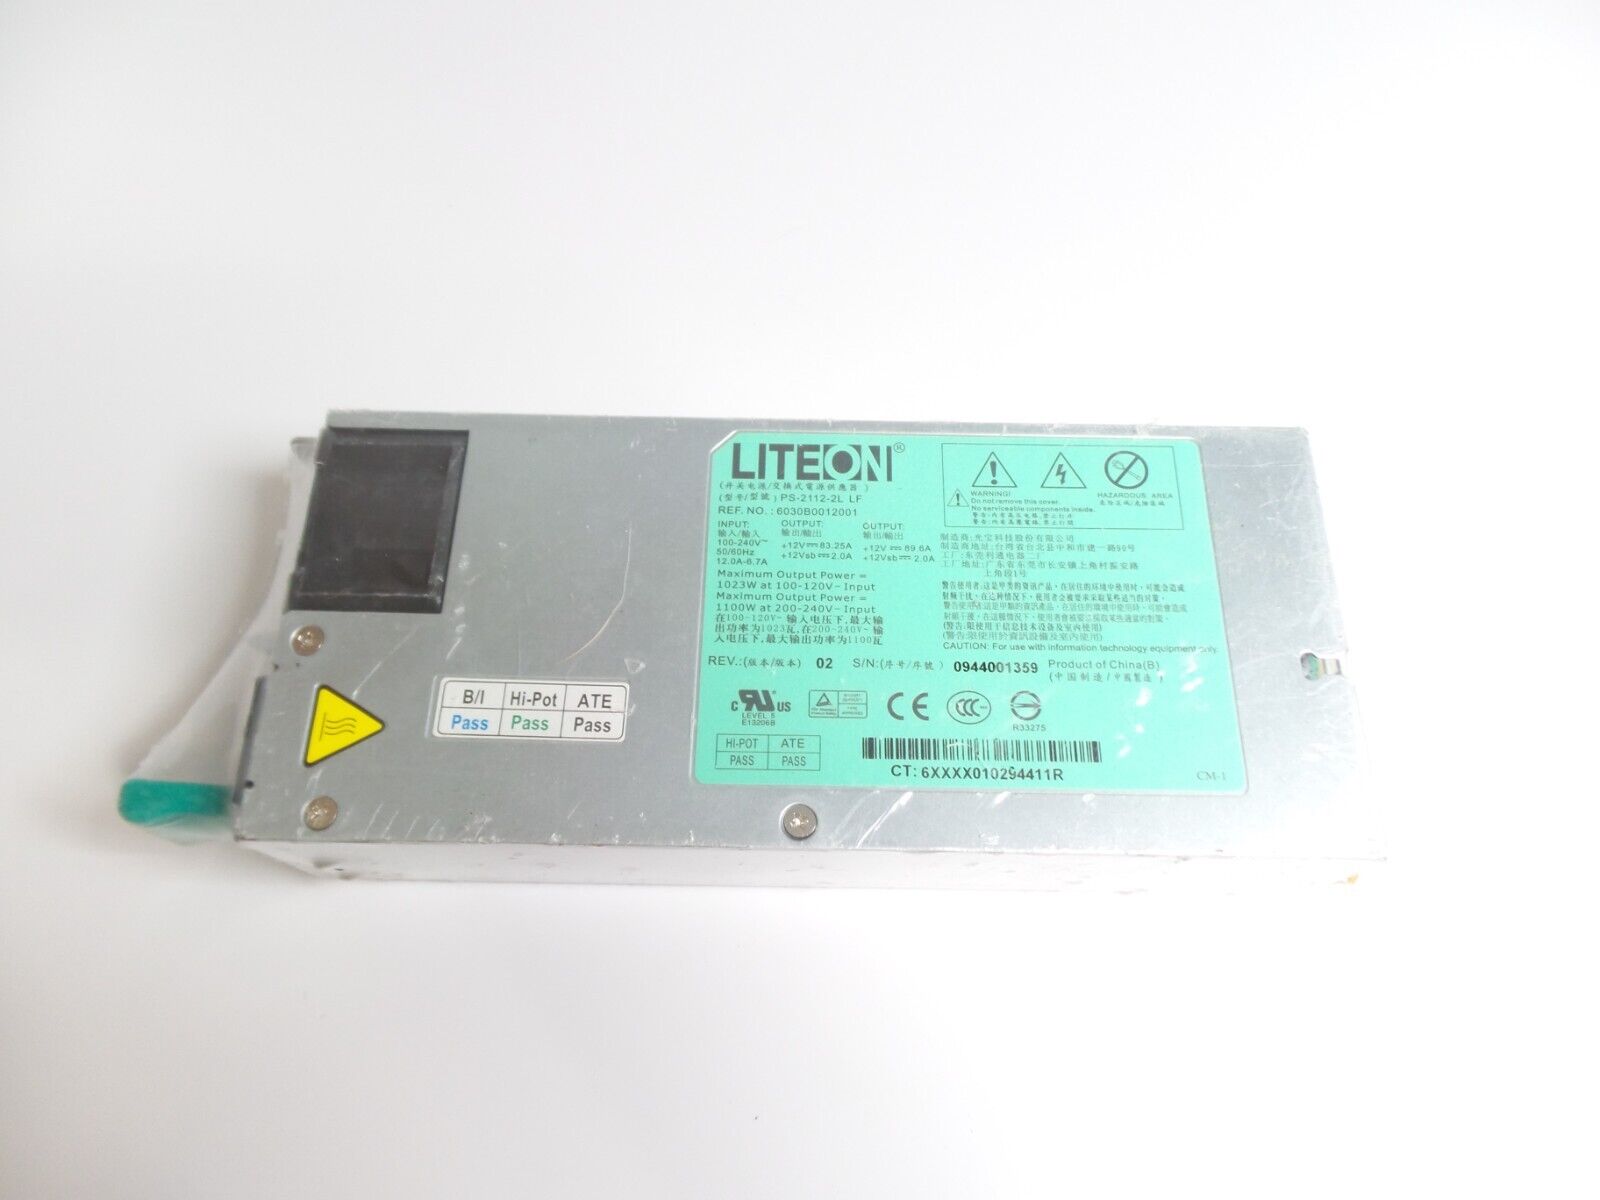 Genuine For Dell C6100 Server 1100W Power Supply LITEON PS-2112-2L